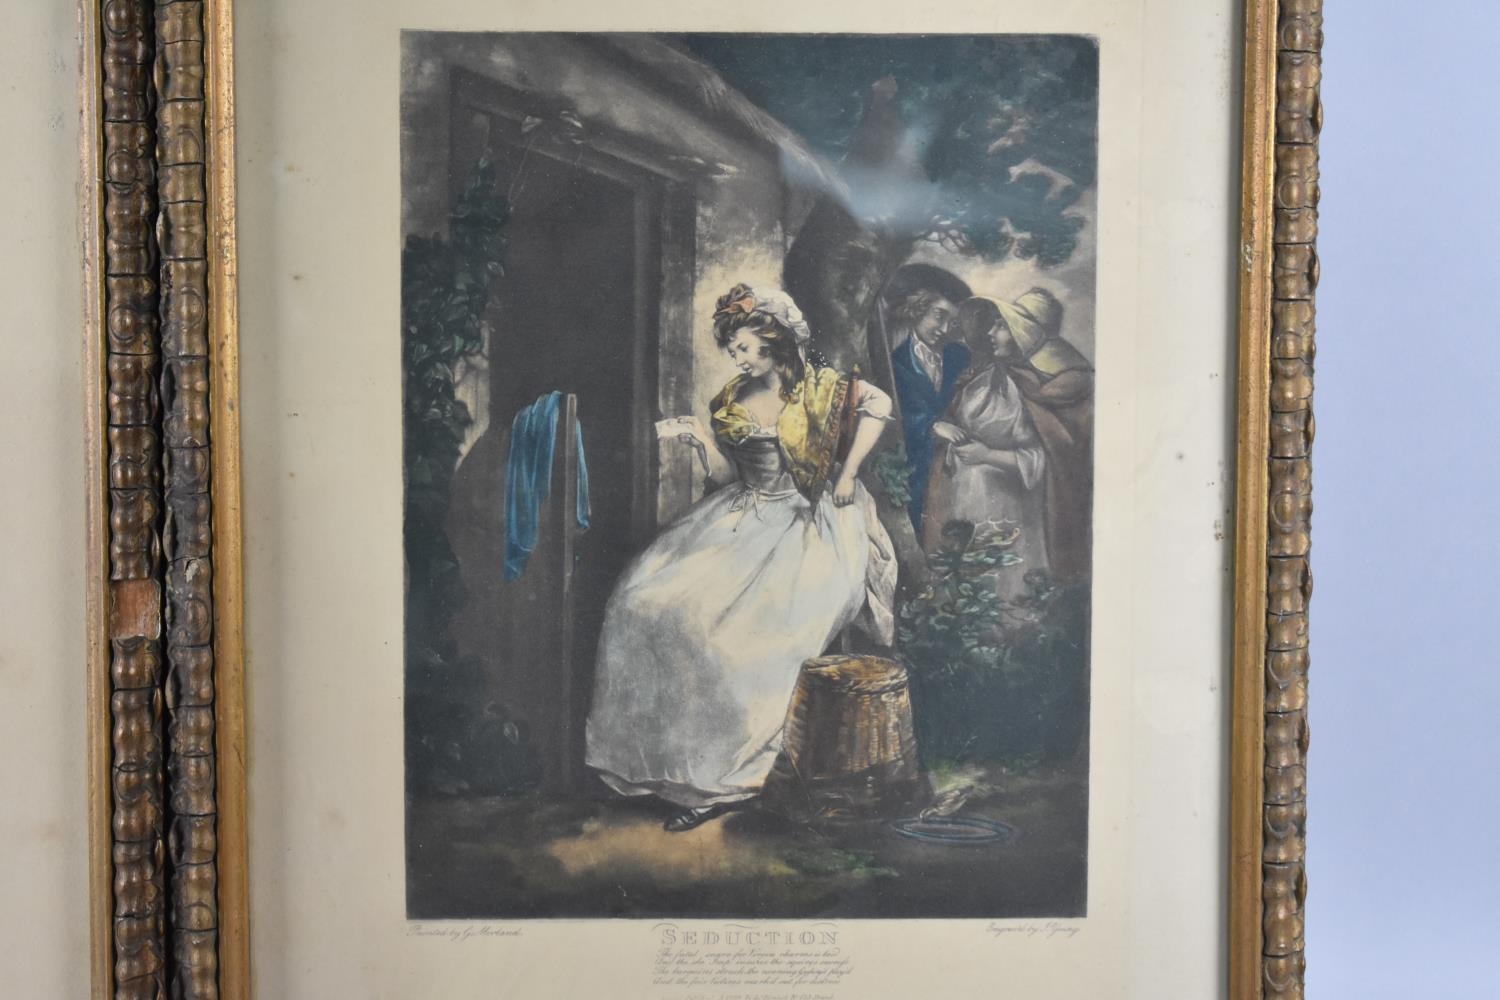 A Pair of Framed Prints of Engravings "Seduction" and "Credulous Innocence" by George Morland, - Image 3 of 3